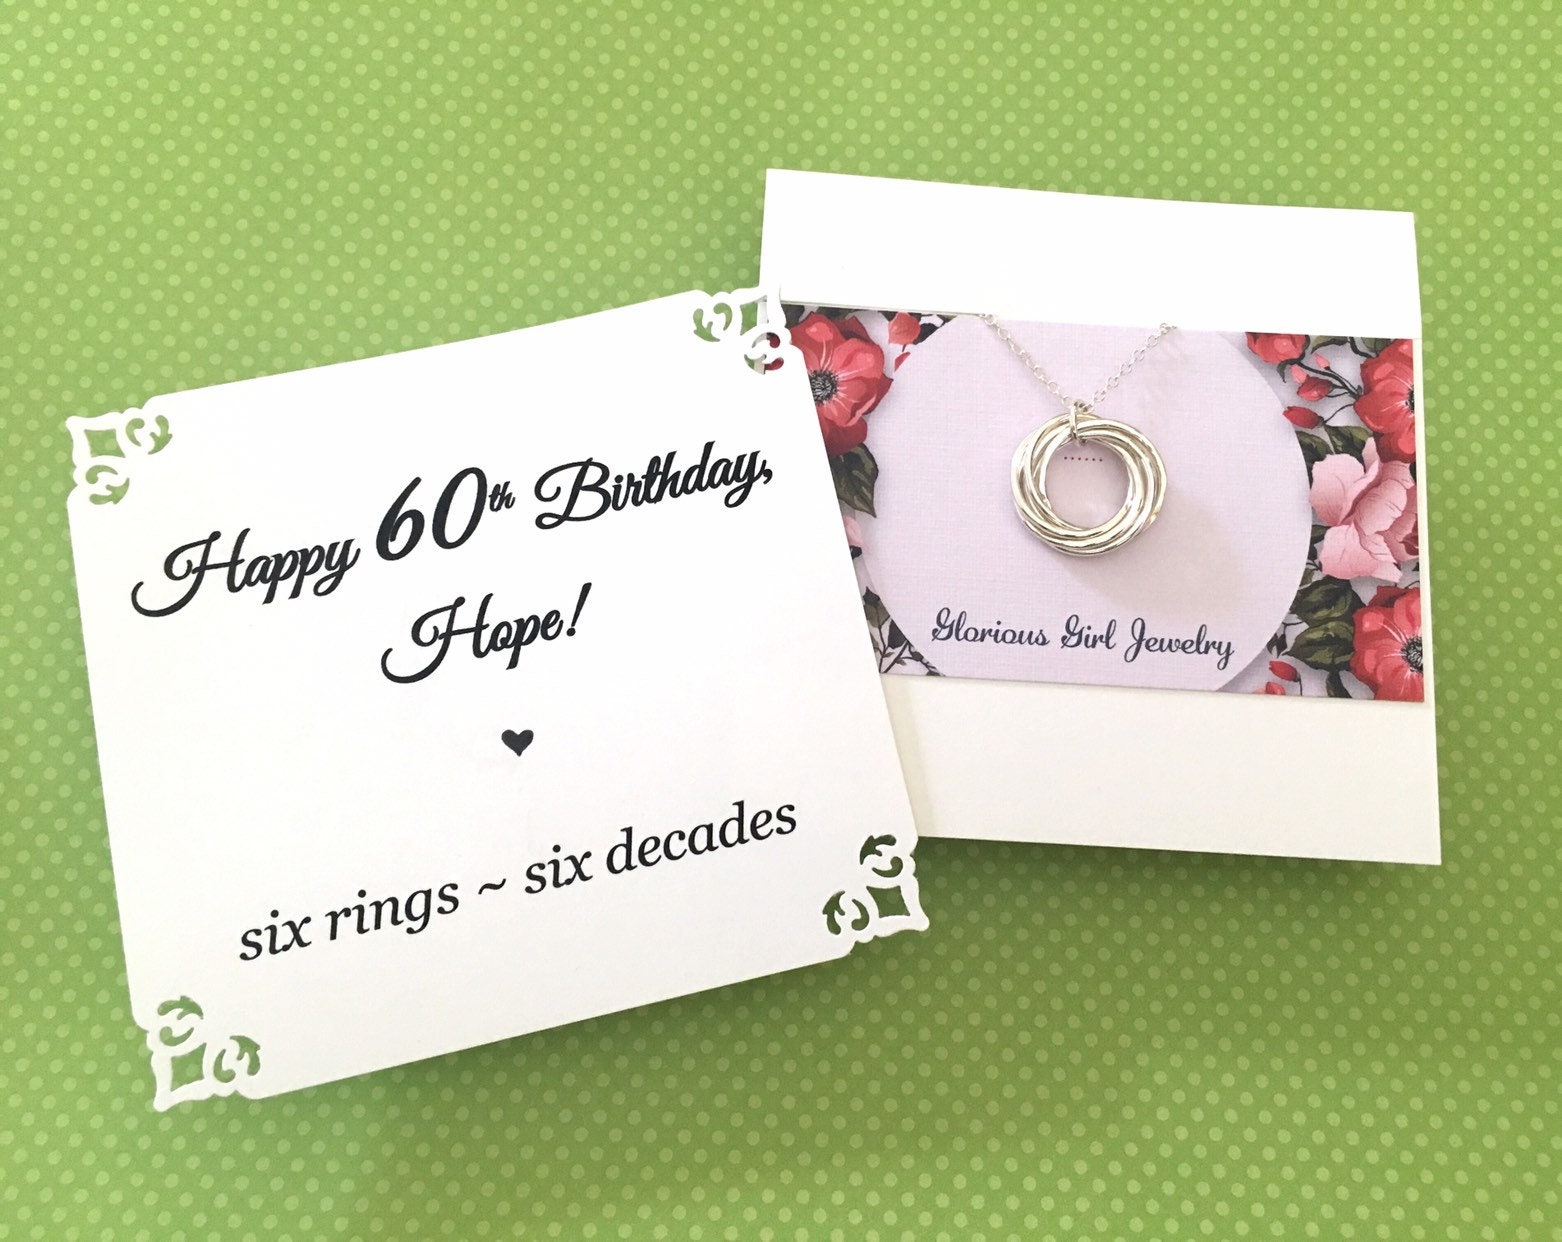 60th BIRTHDAY Gift Necklace for Women Sterling Silver Connected Rings 6 rings for 6 Decades Birthday Gift for Mom 6 Circles Connected